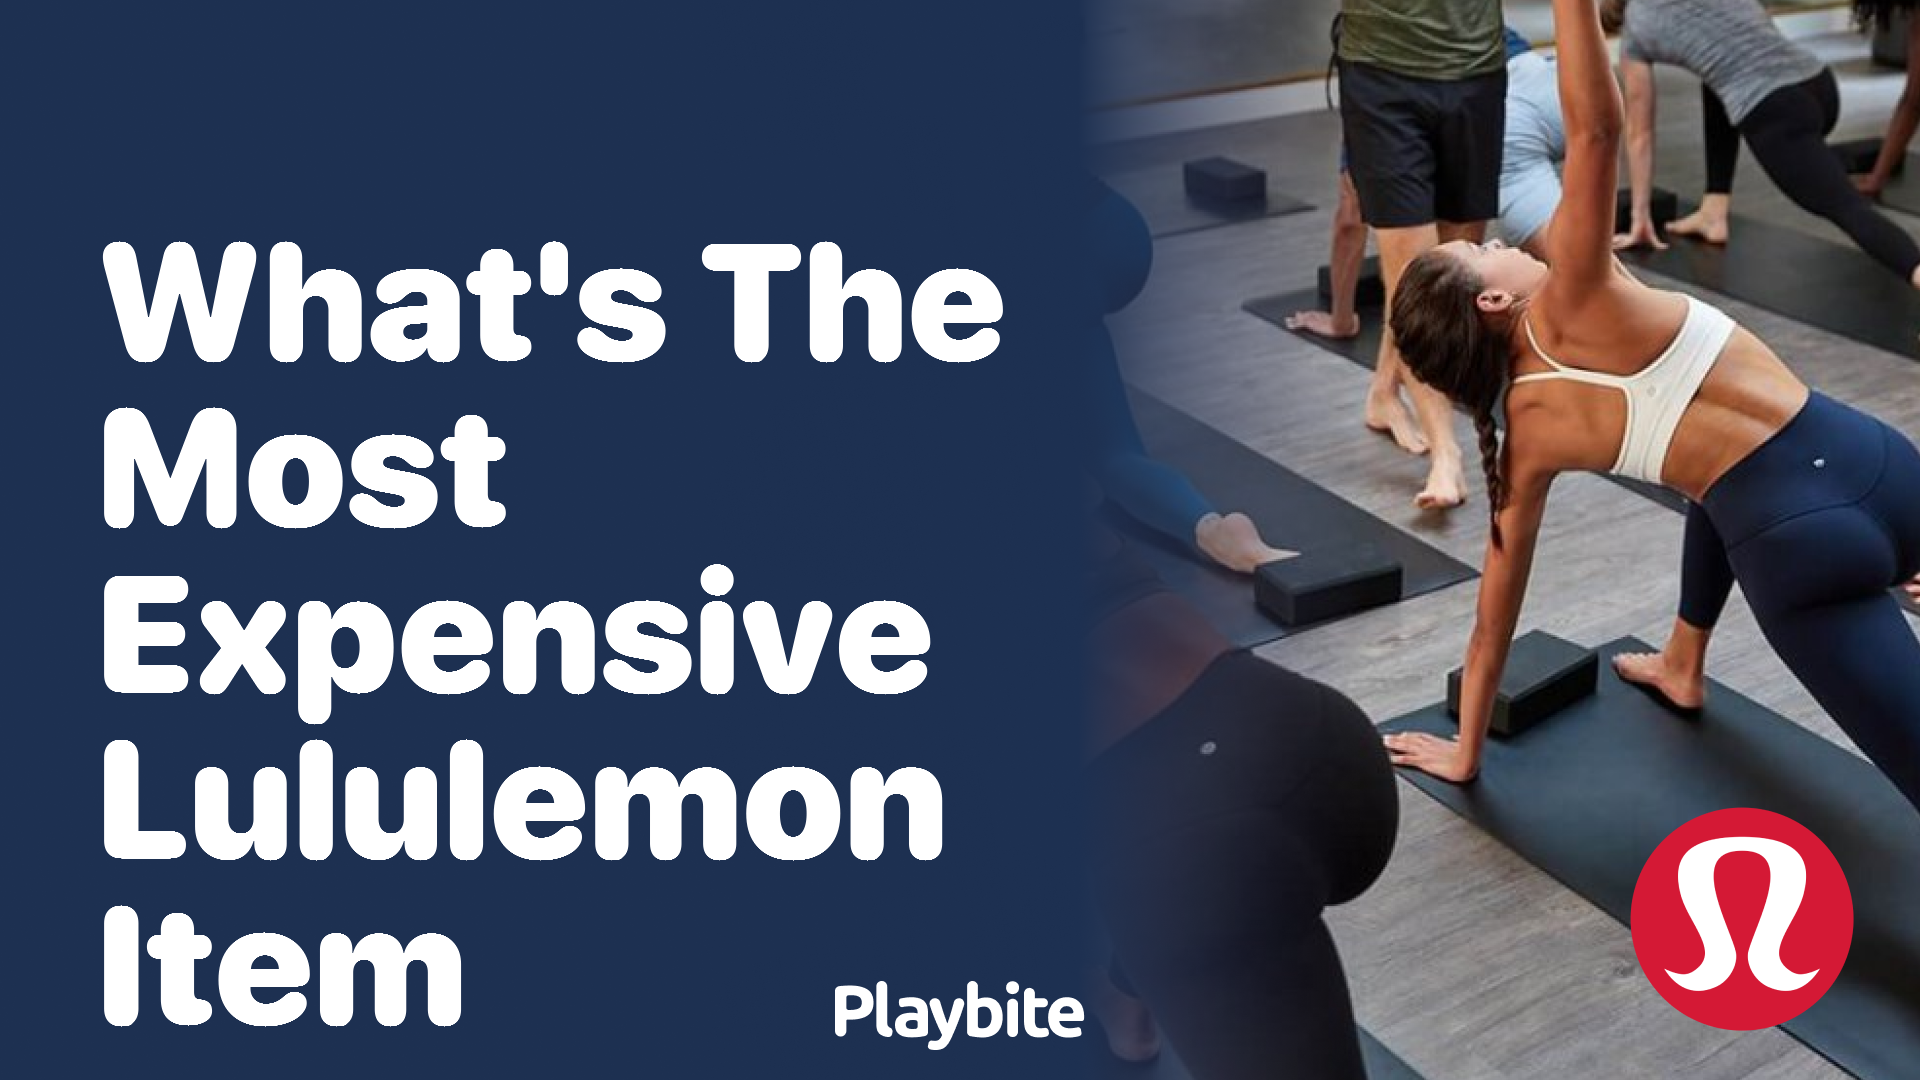 What's the Most Expensive Lululemon Item? - Playbite